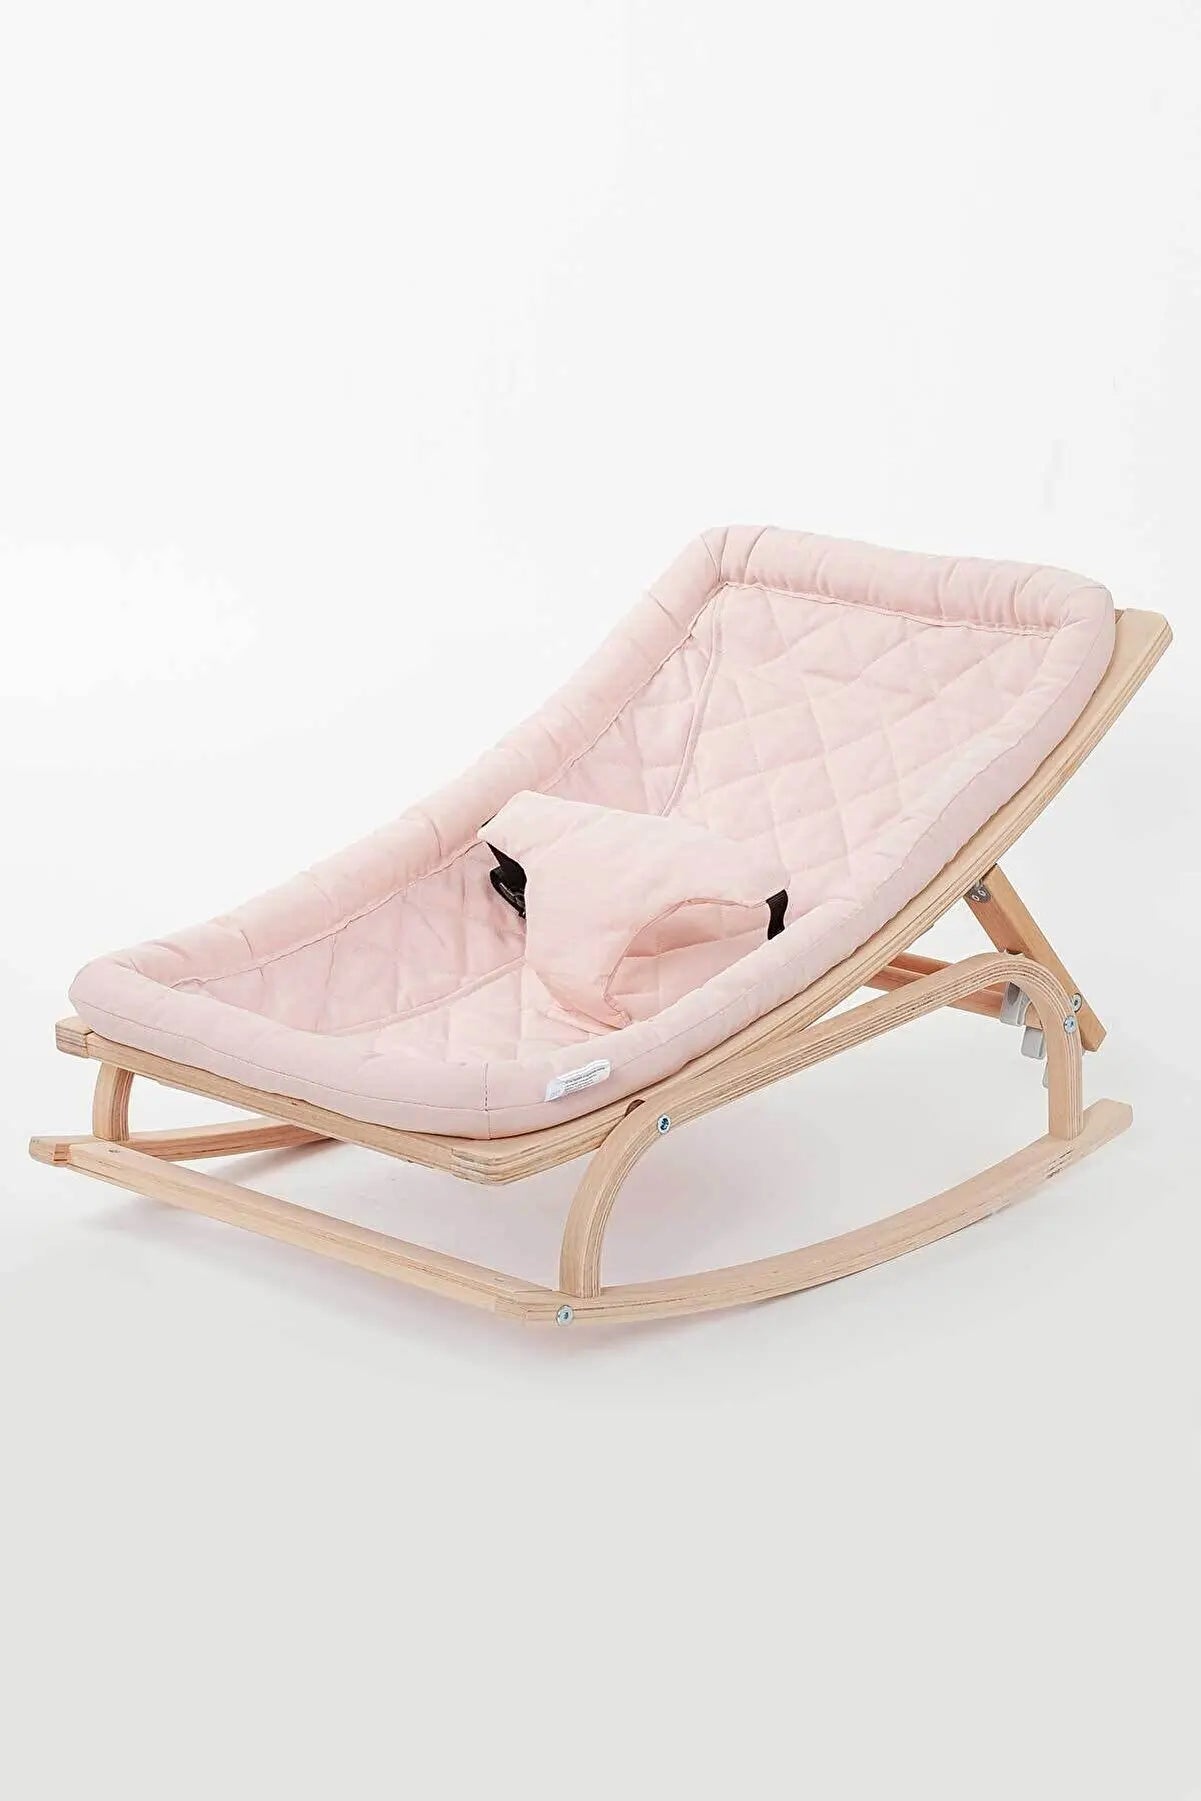 Natural Wood Baby Rocking Chair - Eco-Friendly Soothing Crib with Adjustable Features for Newborns